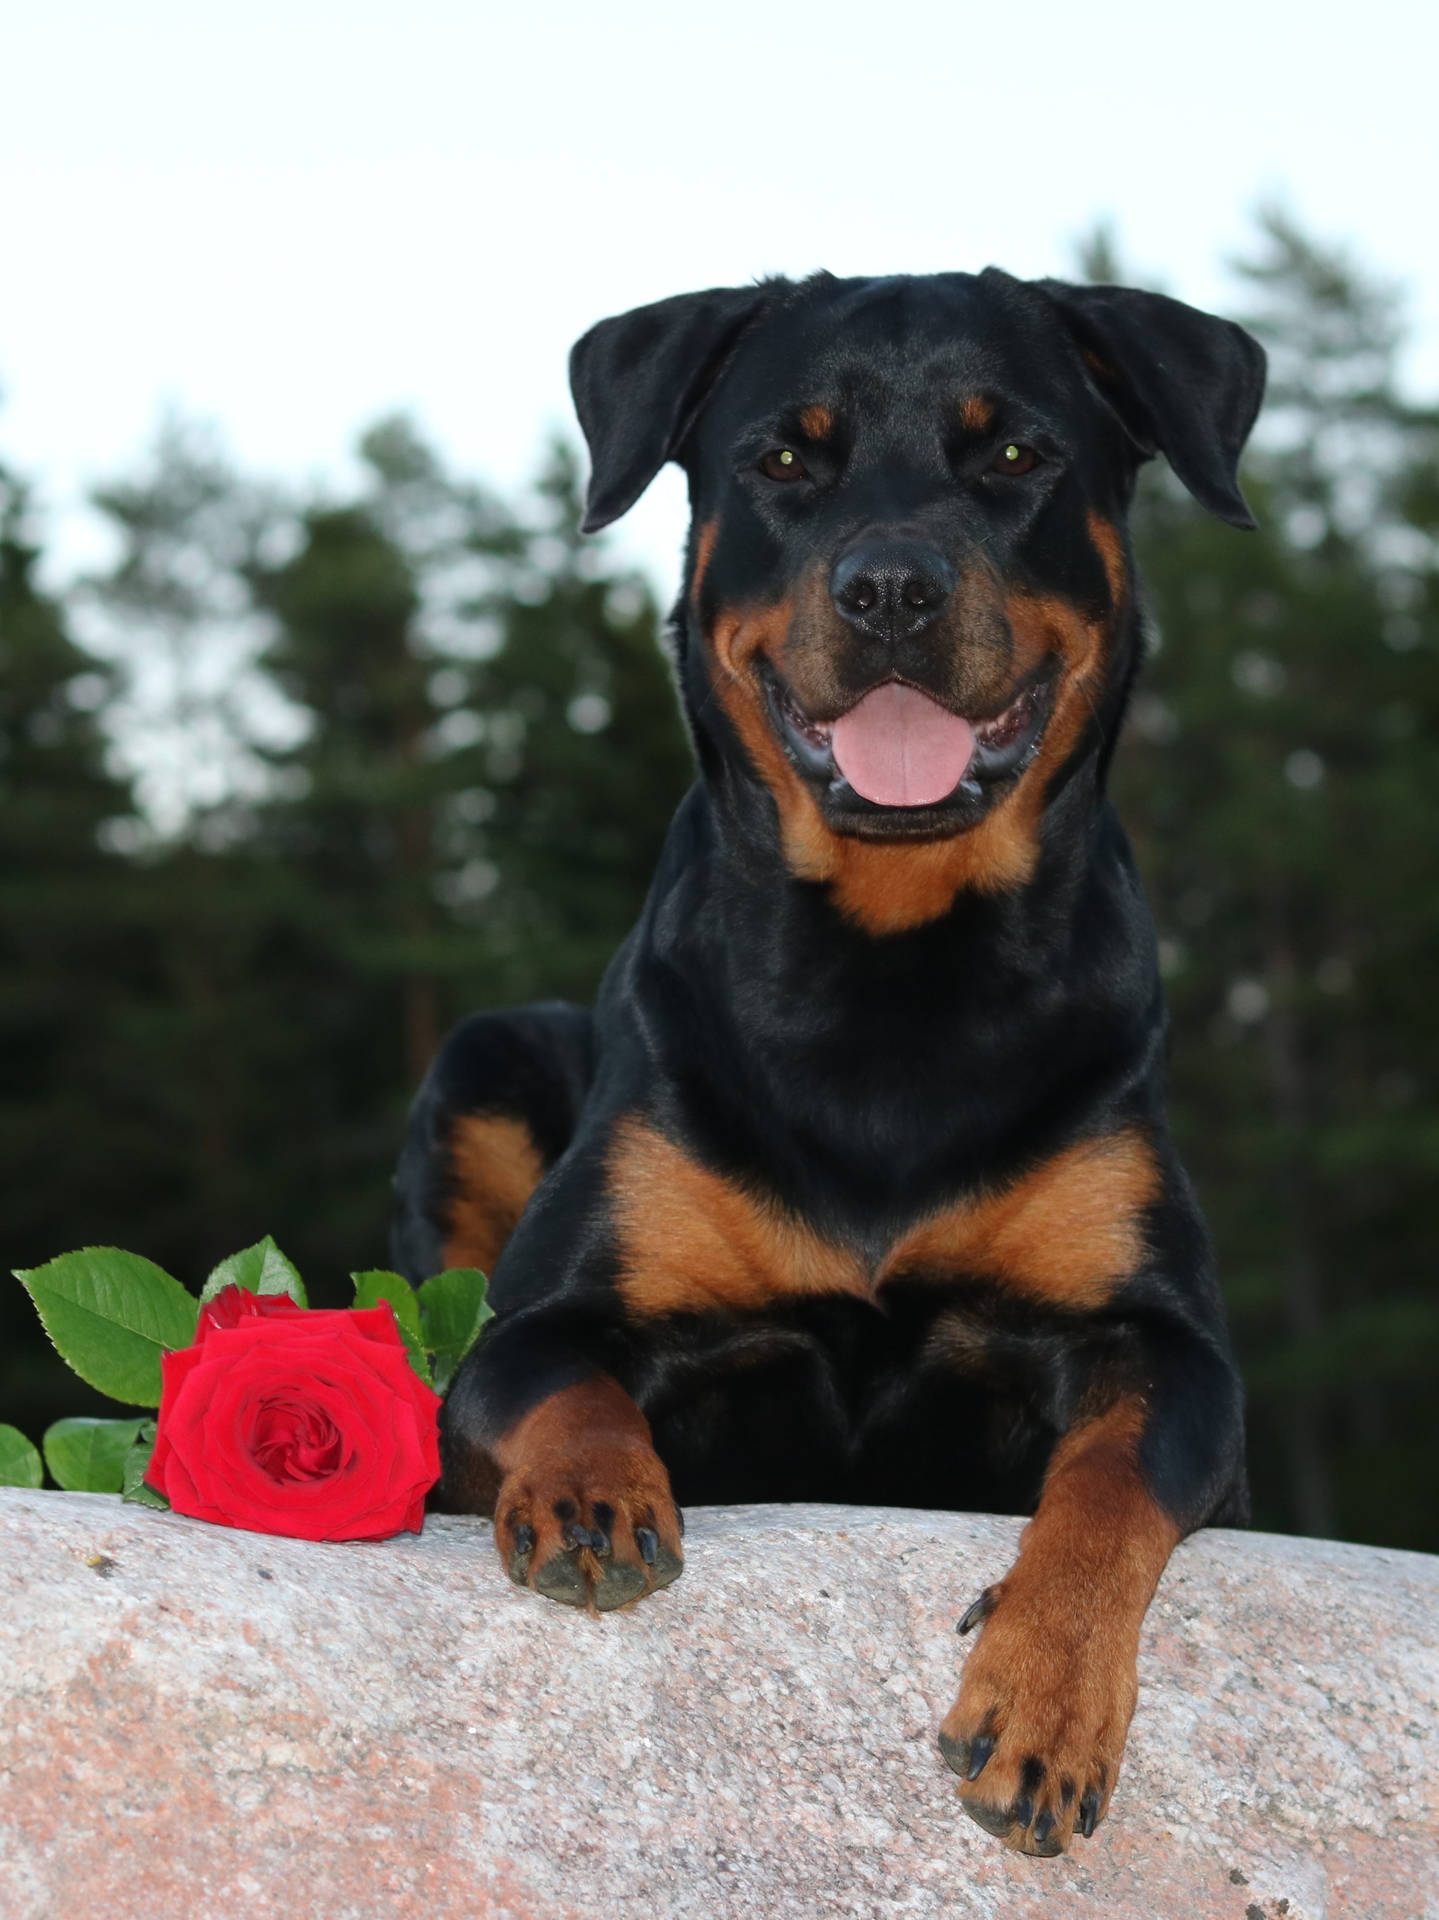 Romantic Rottweiler Dog With Rose